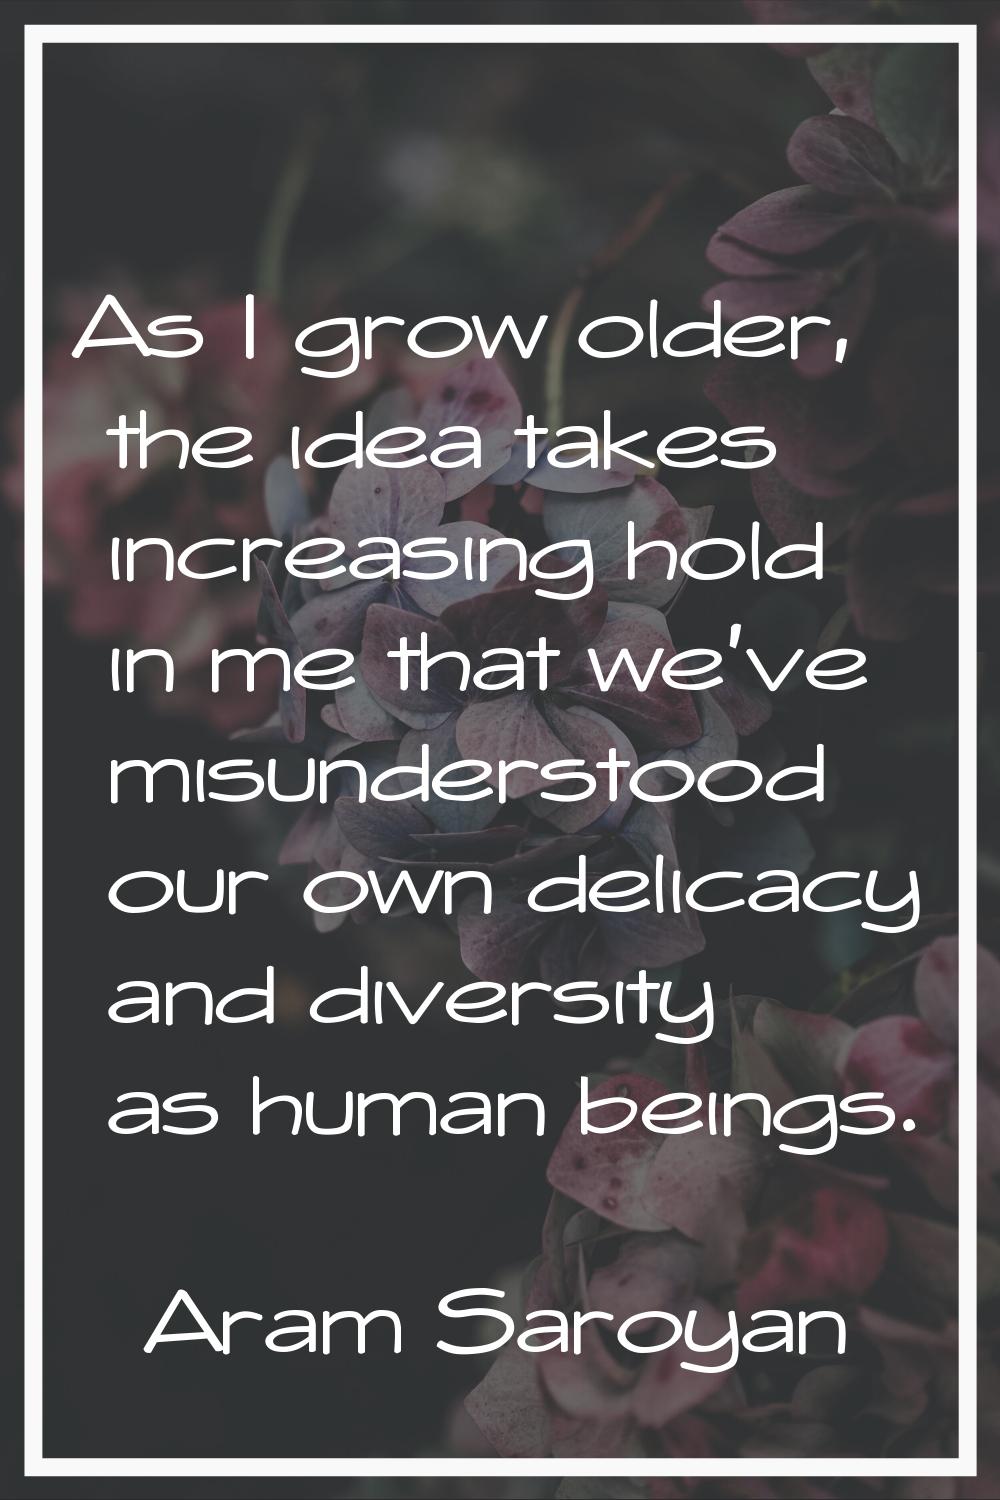 As I grow older, the idea takes increasing hold in me that we've misunderstood our own delicacy and